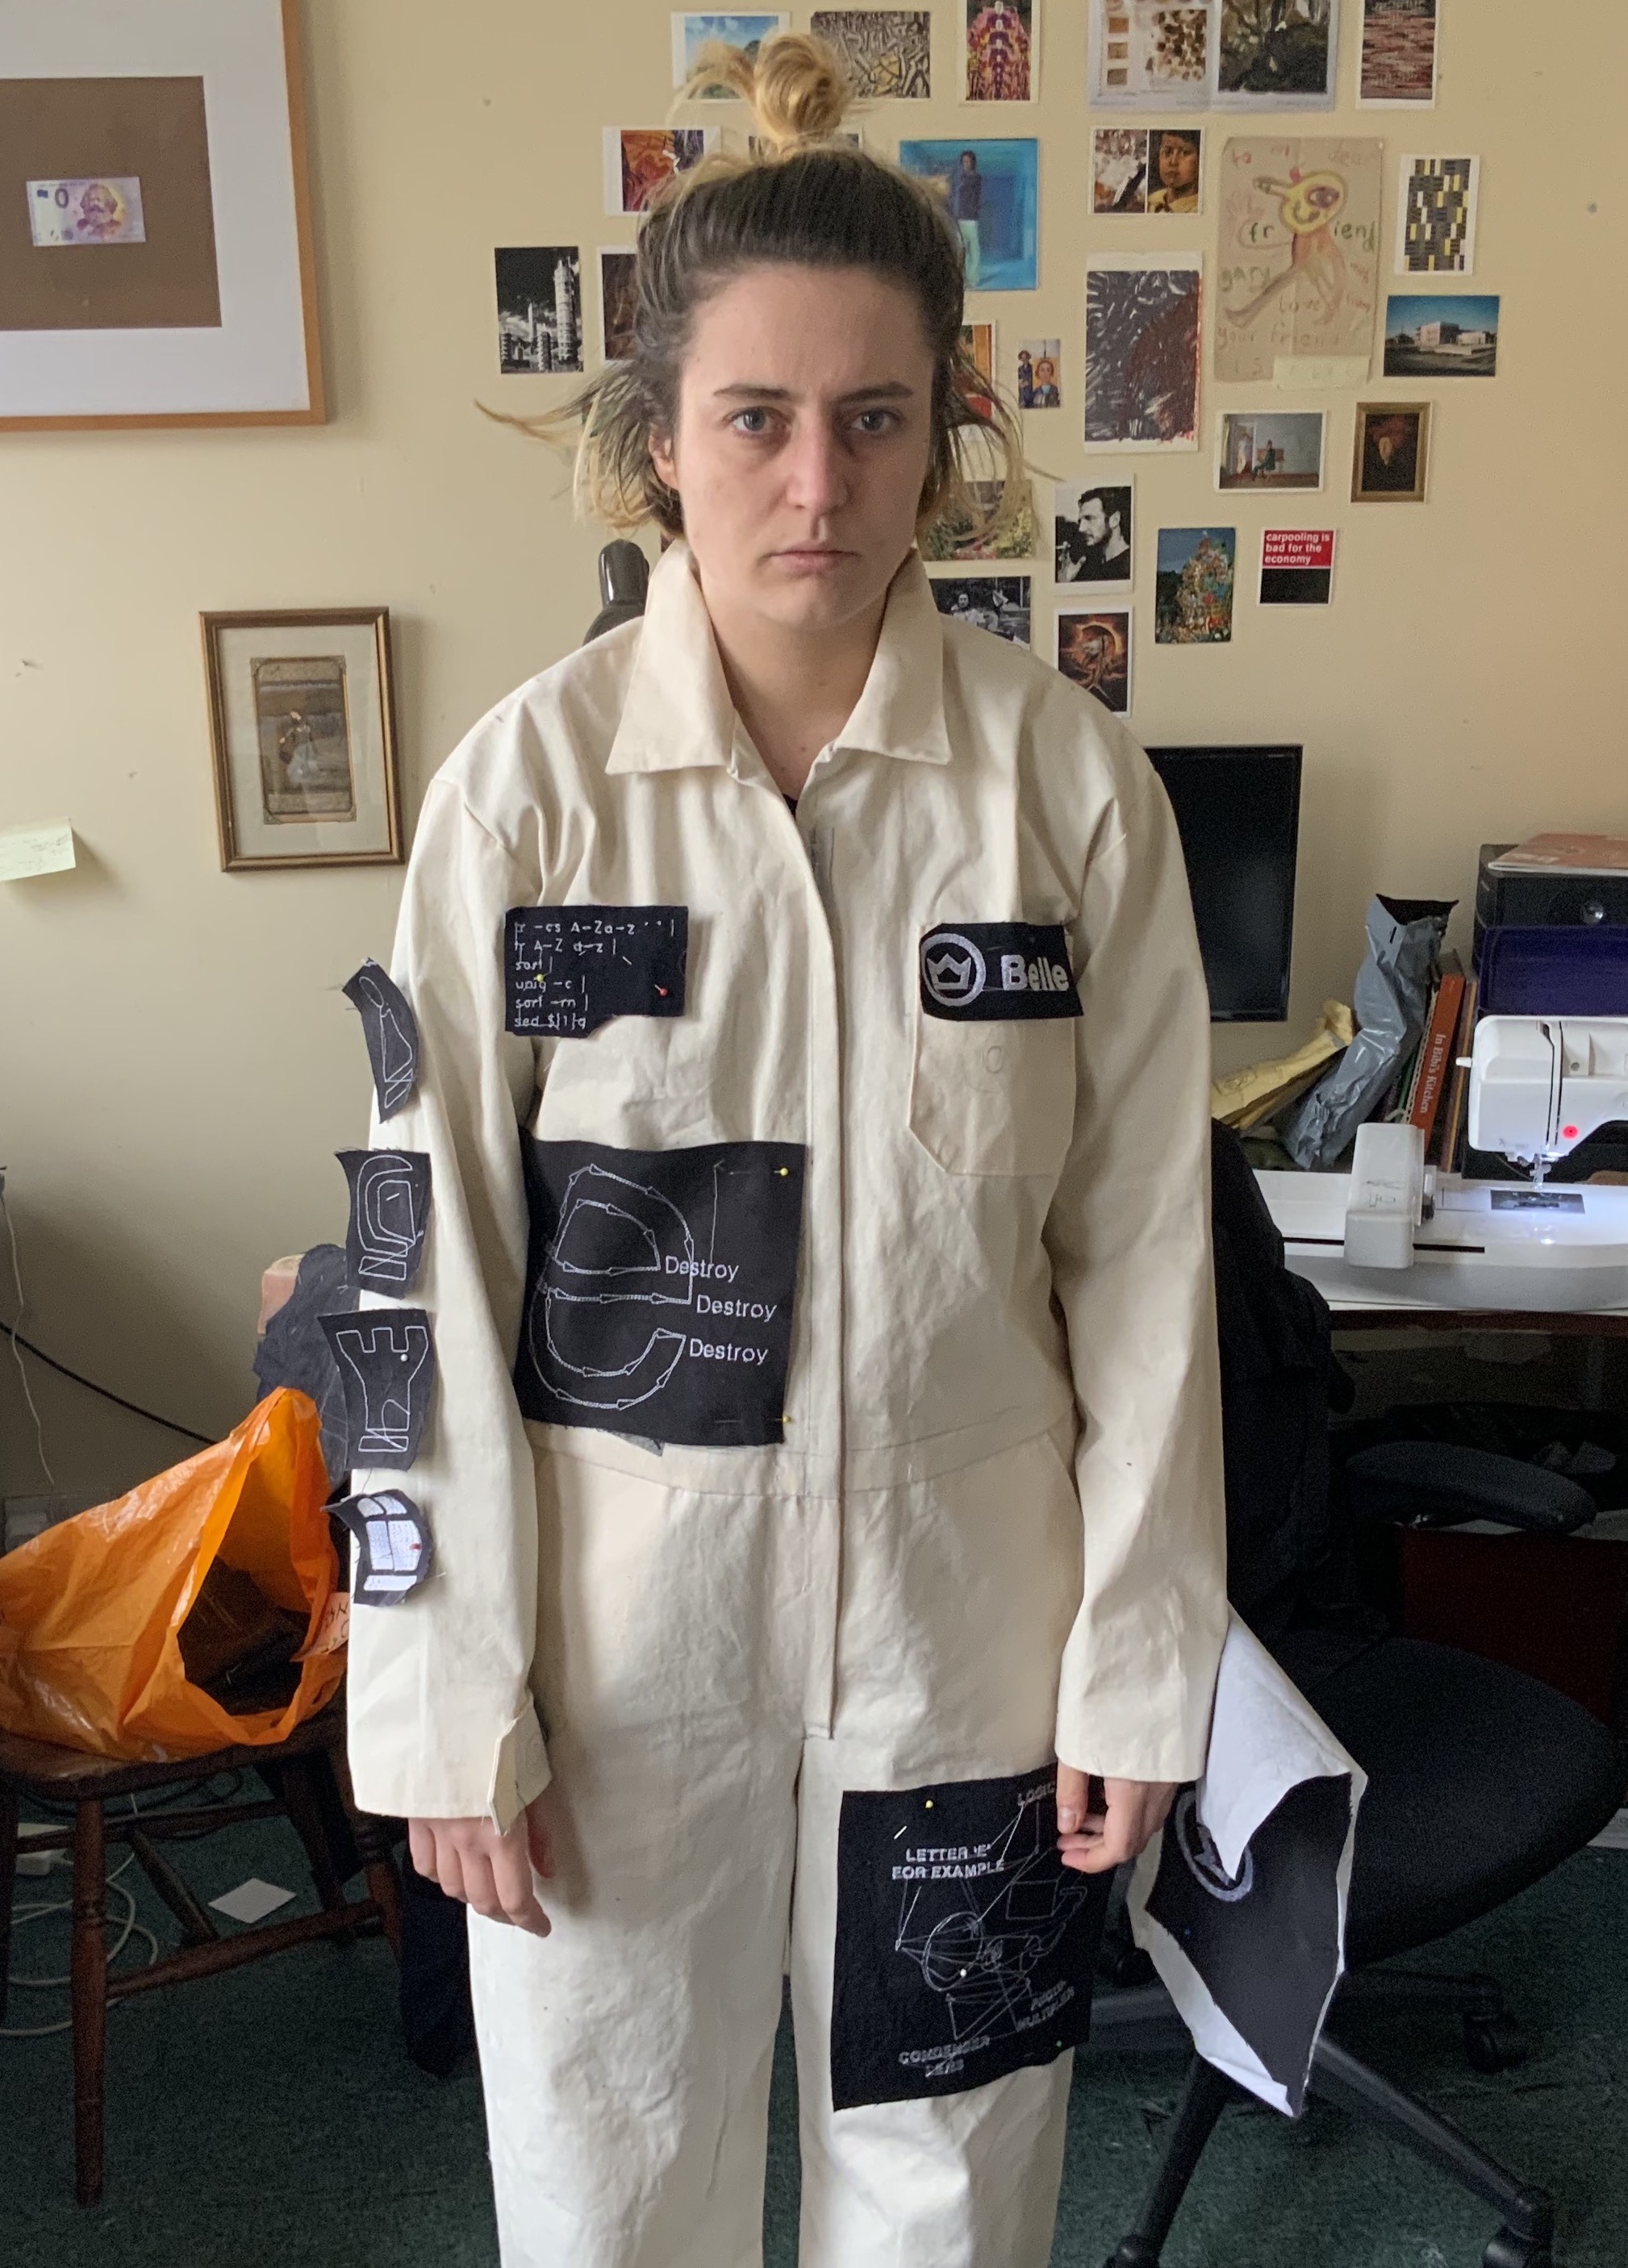 testing patches pinned to suit (but I look sad)